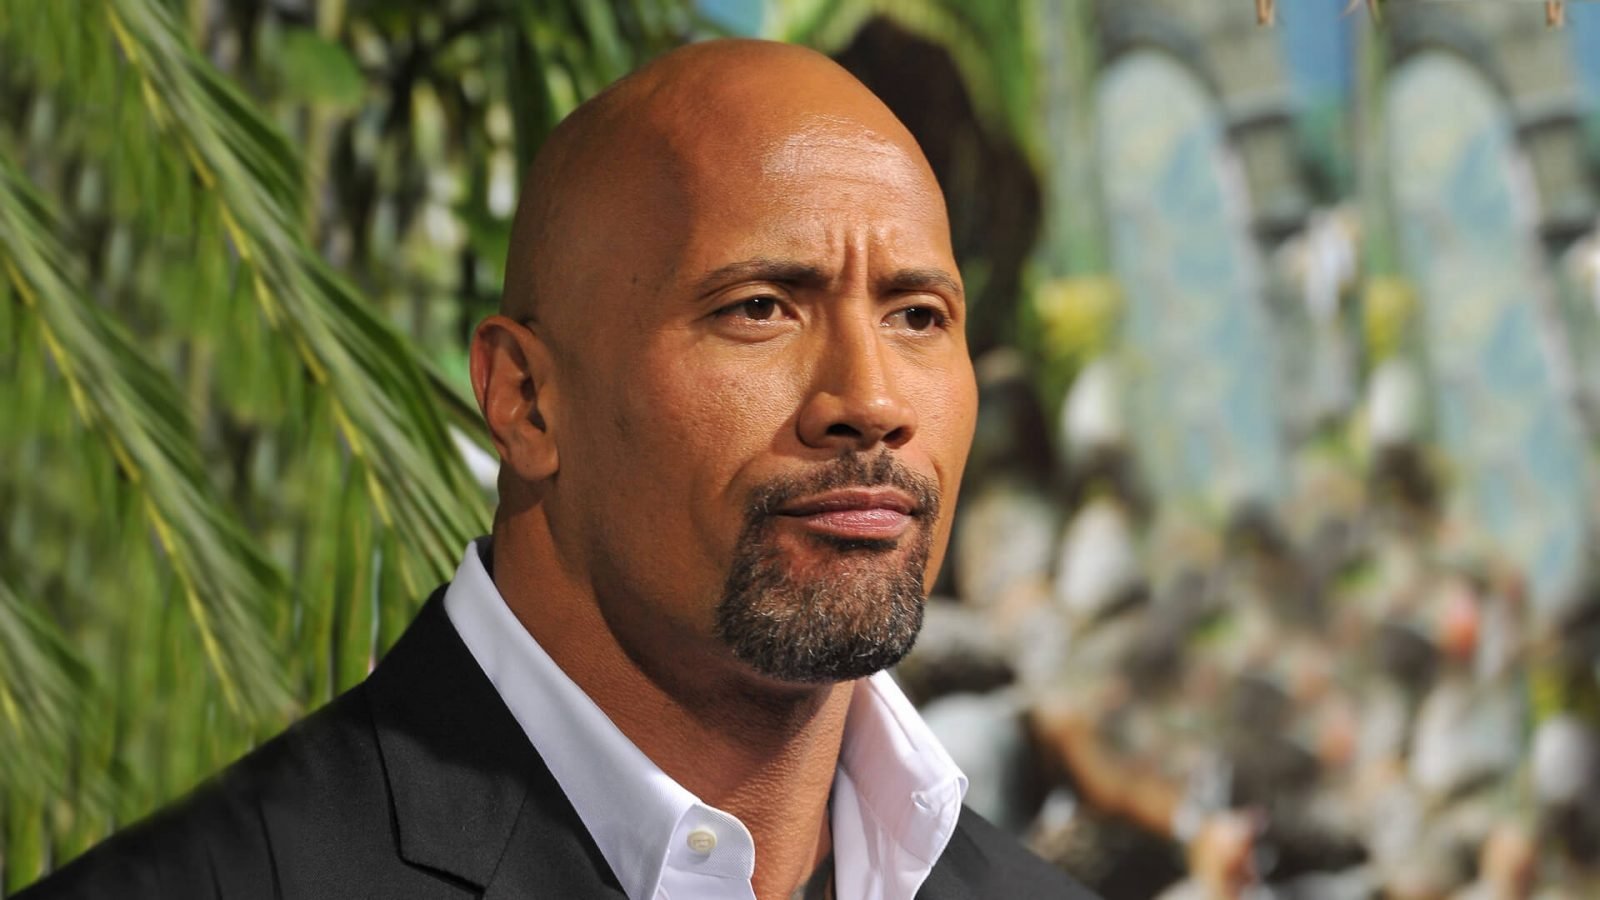 Dwayne Johnson Net Worth. How Much is the Rock Worth? Storia